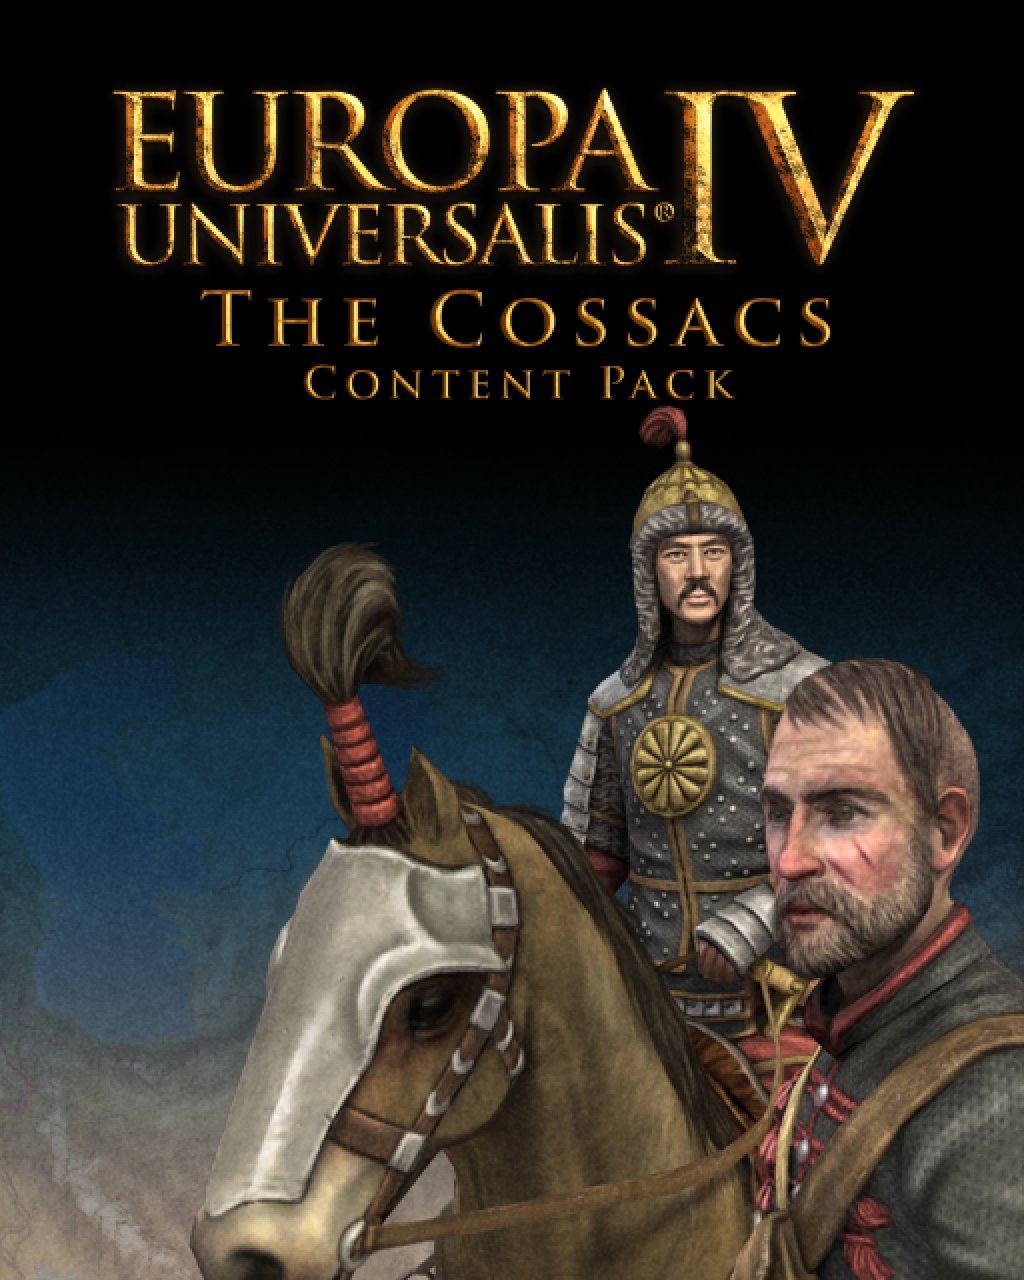 Europa Universalis IV The Cossacks Content Pack